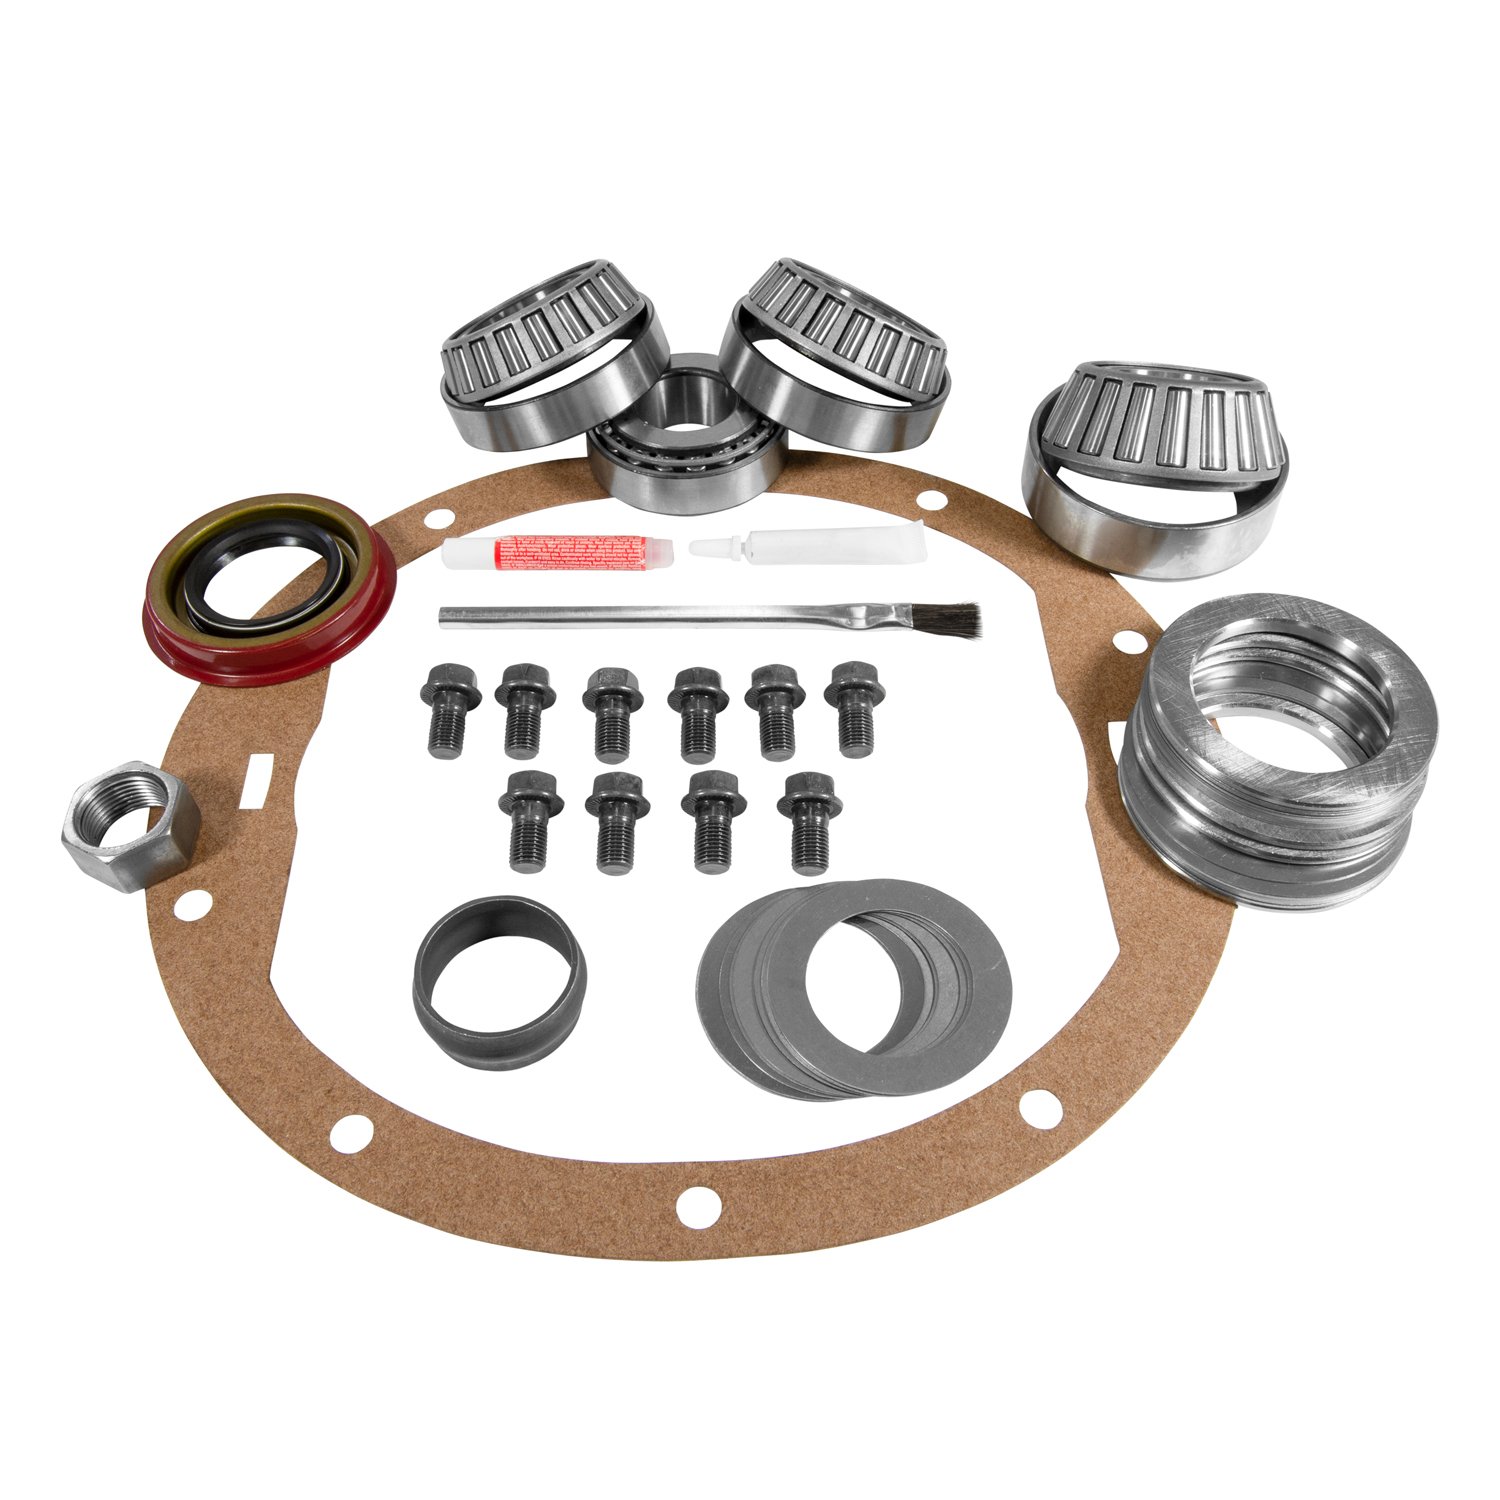 USA Standard ZK GM8.0 Master Overhaul Kit, For GM 8 in. Differential